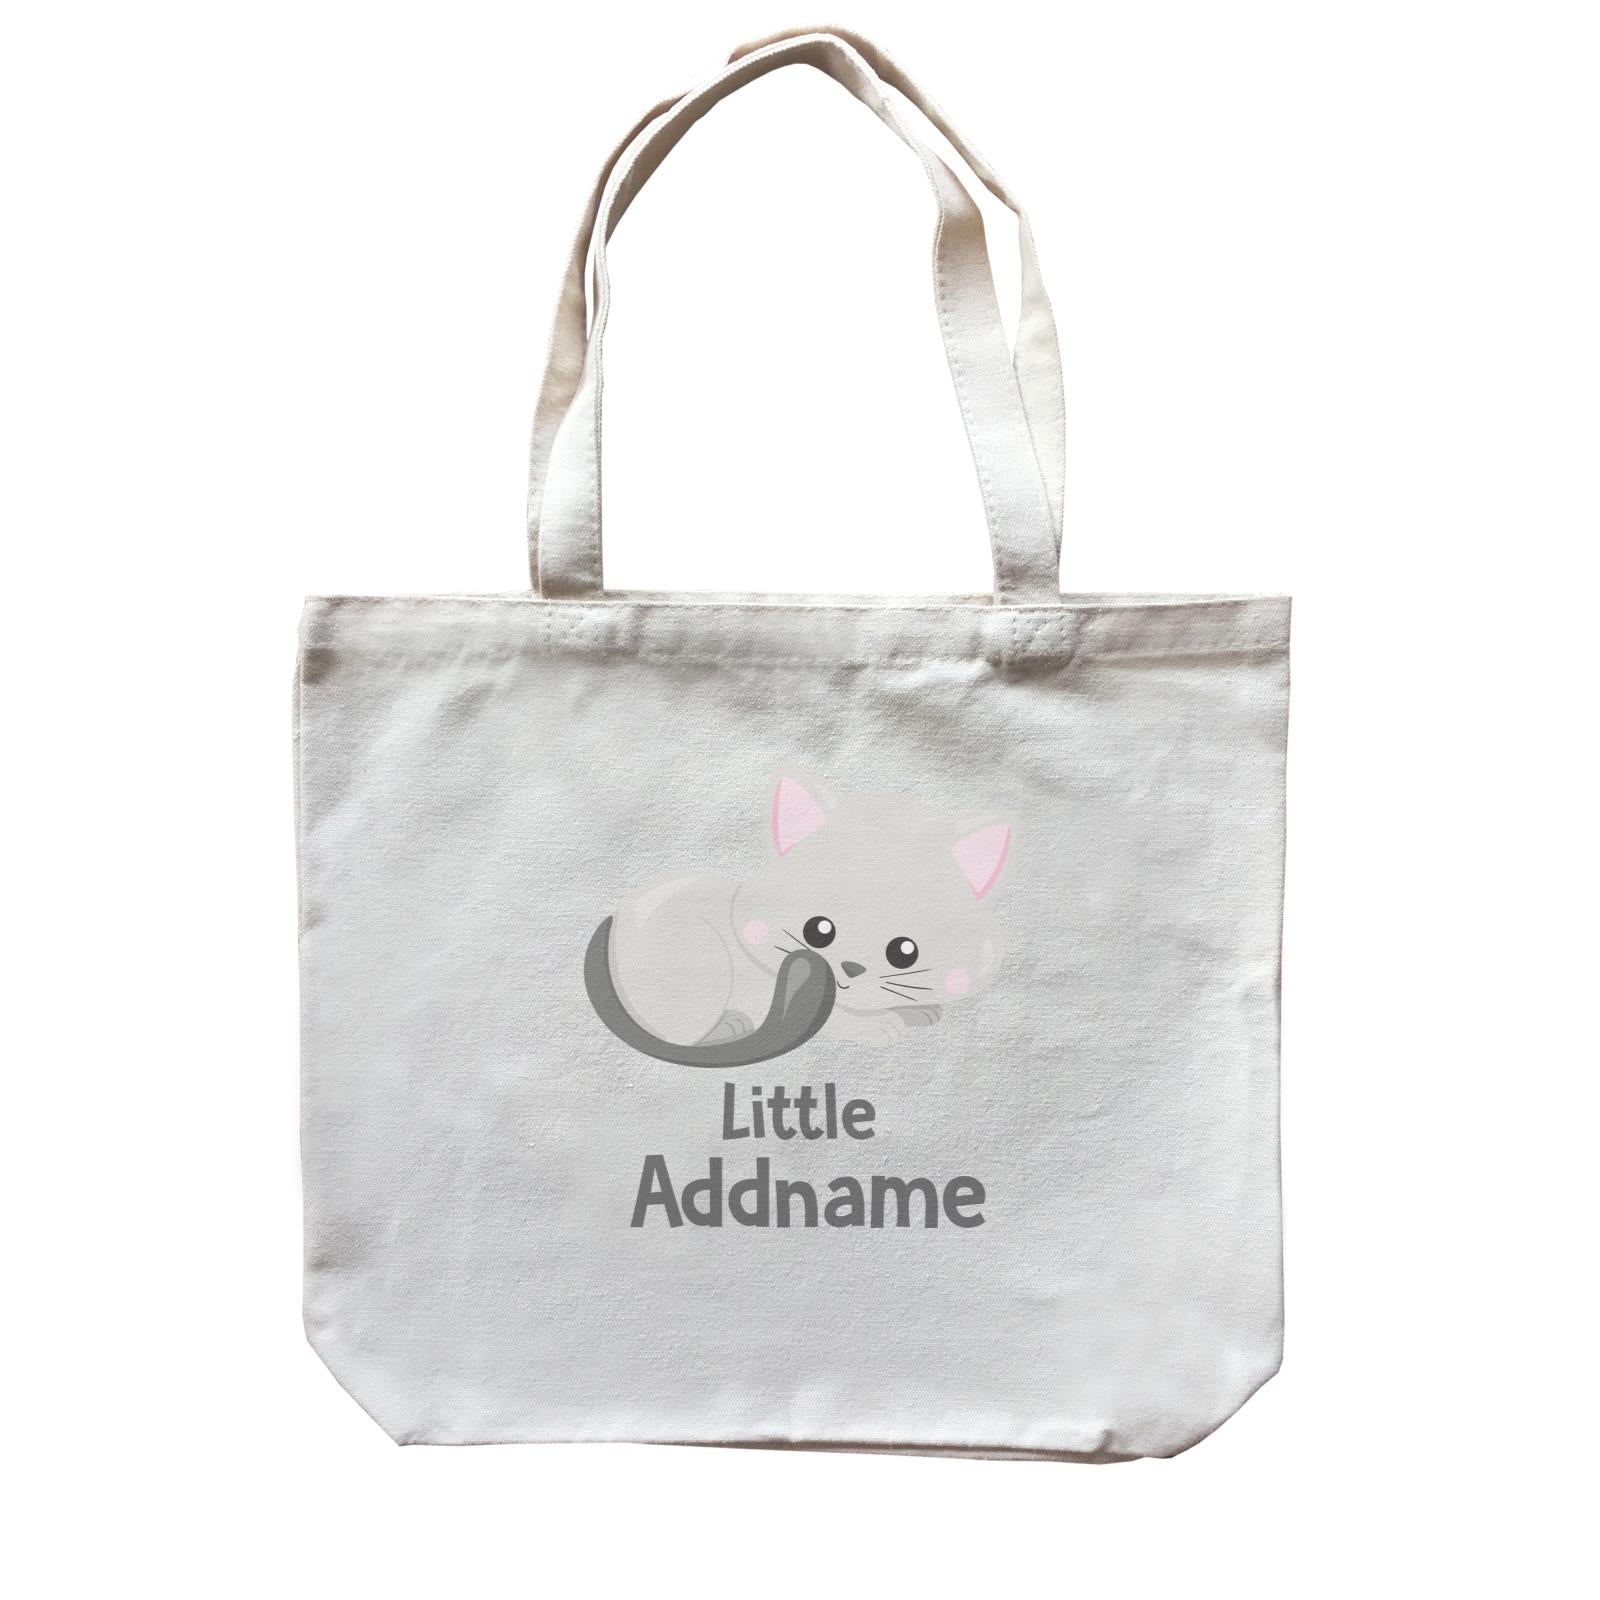 Adorable Cats Grey Cat Little Addname Canvas Bag